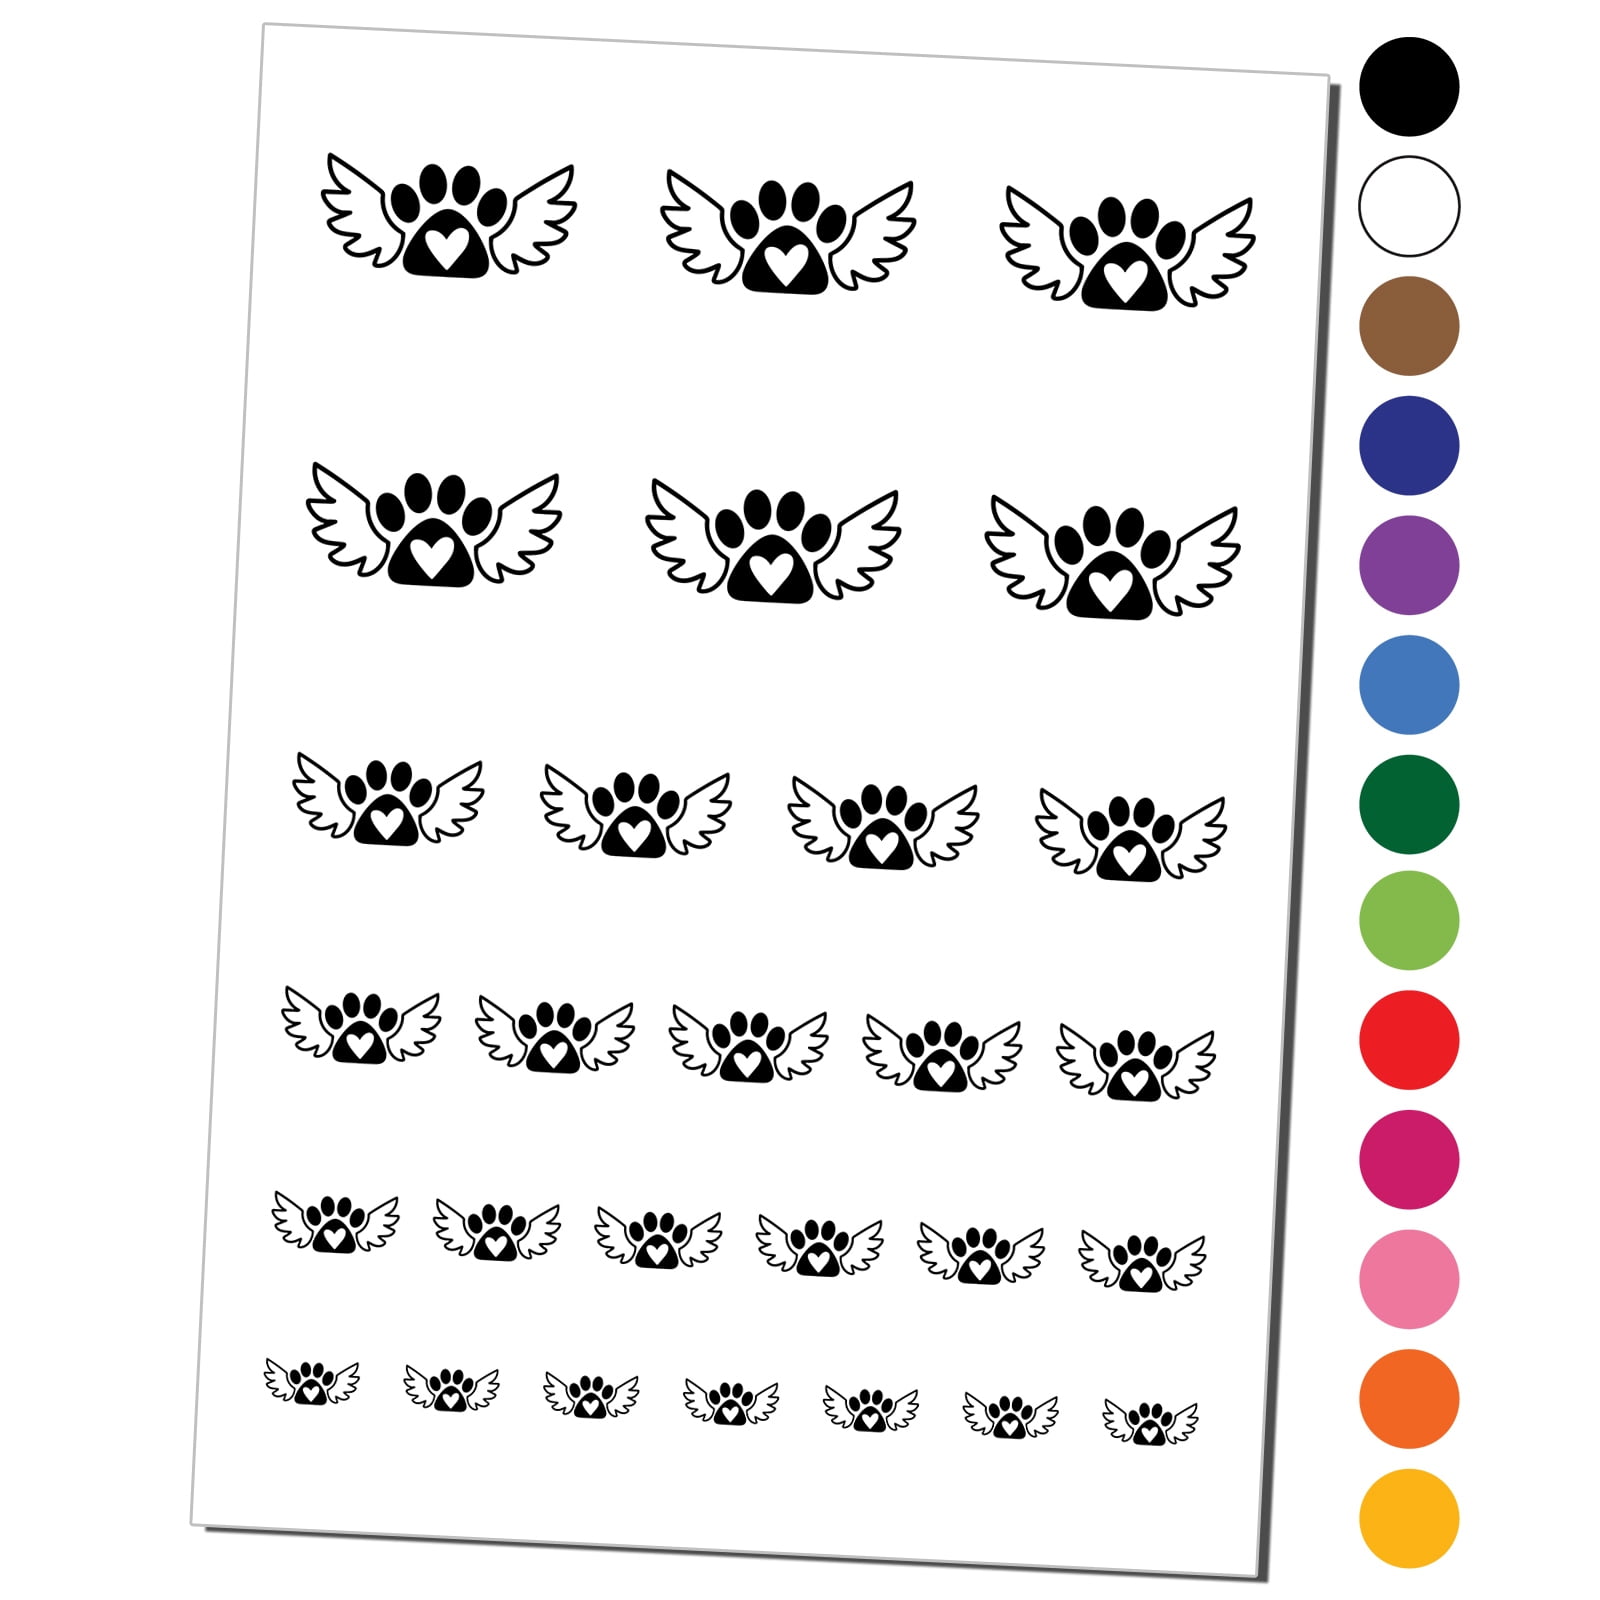 Paw Print Angel Wings with Heart Dog Cat Water Resistant Temporary Tattoo Set Fake Body Art Collection - Brown - Walmart.com